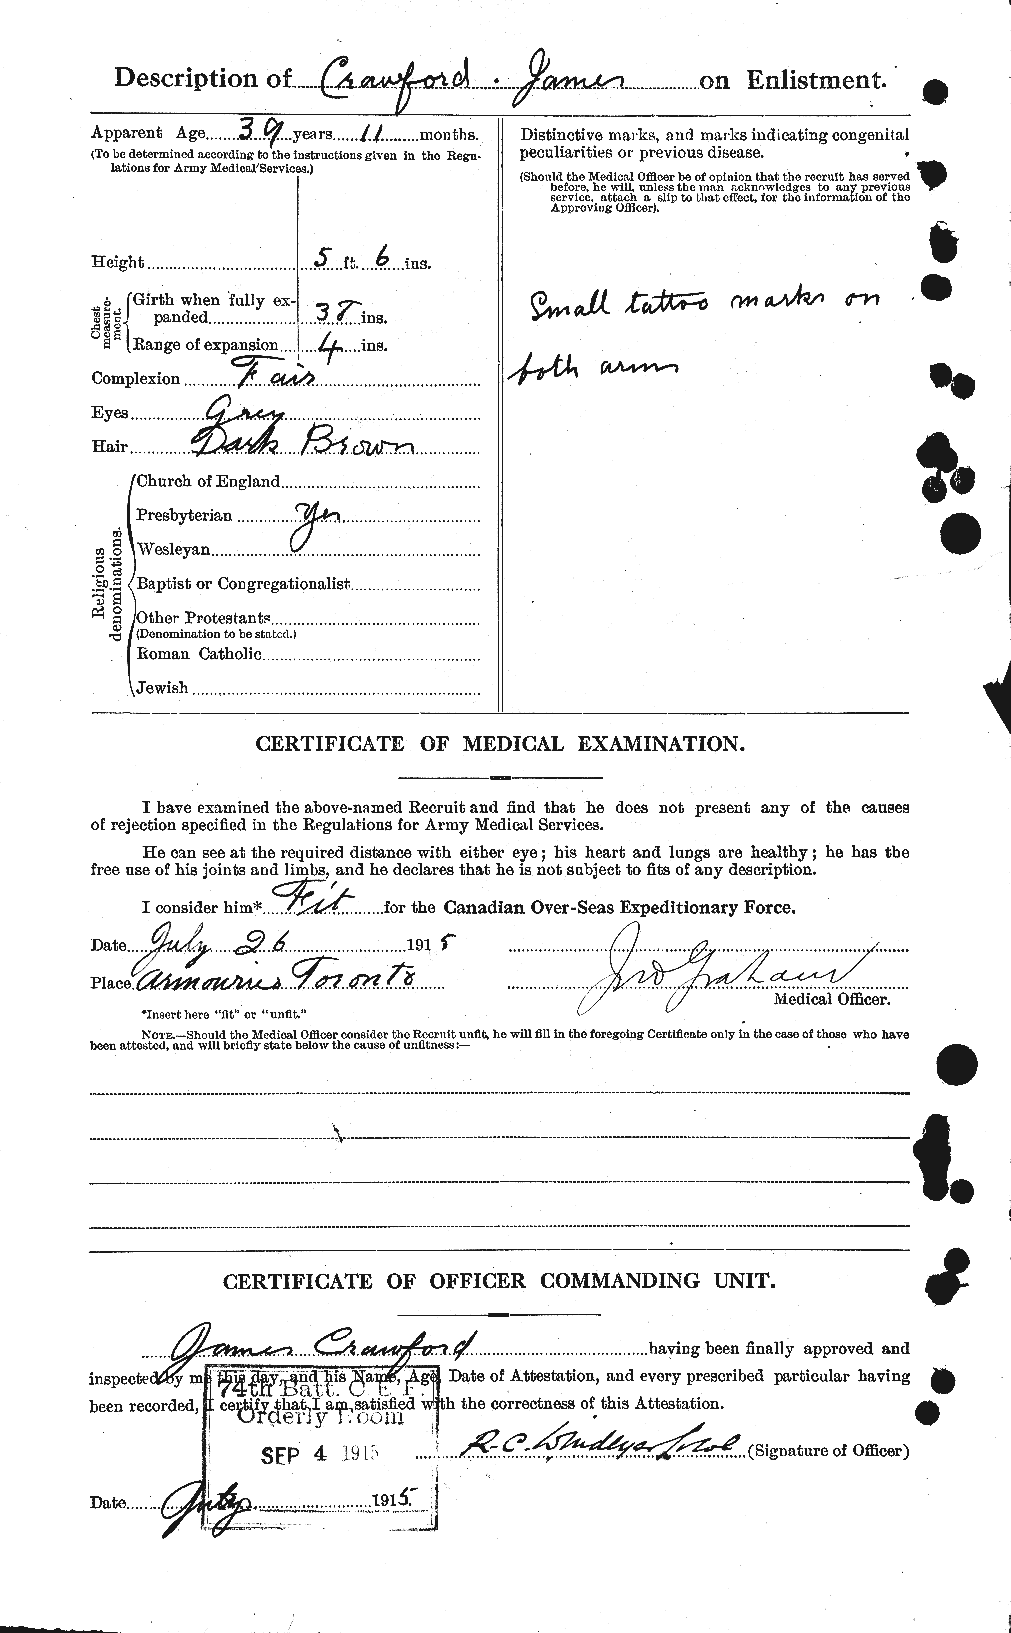 Personnel Records of the First World War - CEF 062773b